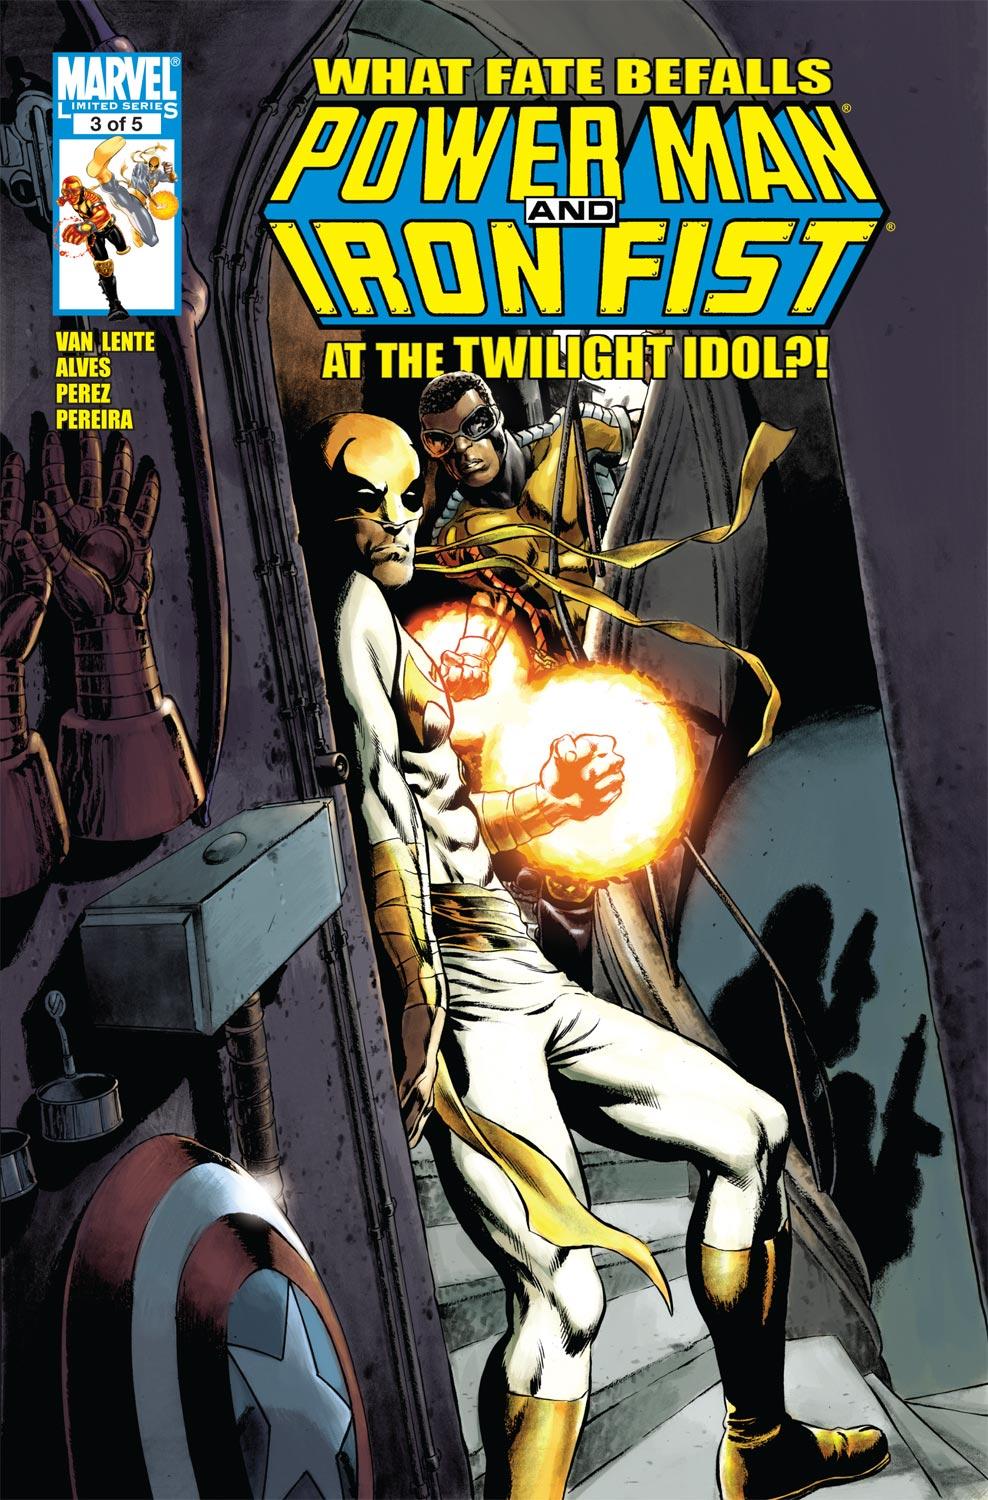 Power Man and Iron Fist (2010) #3